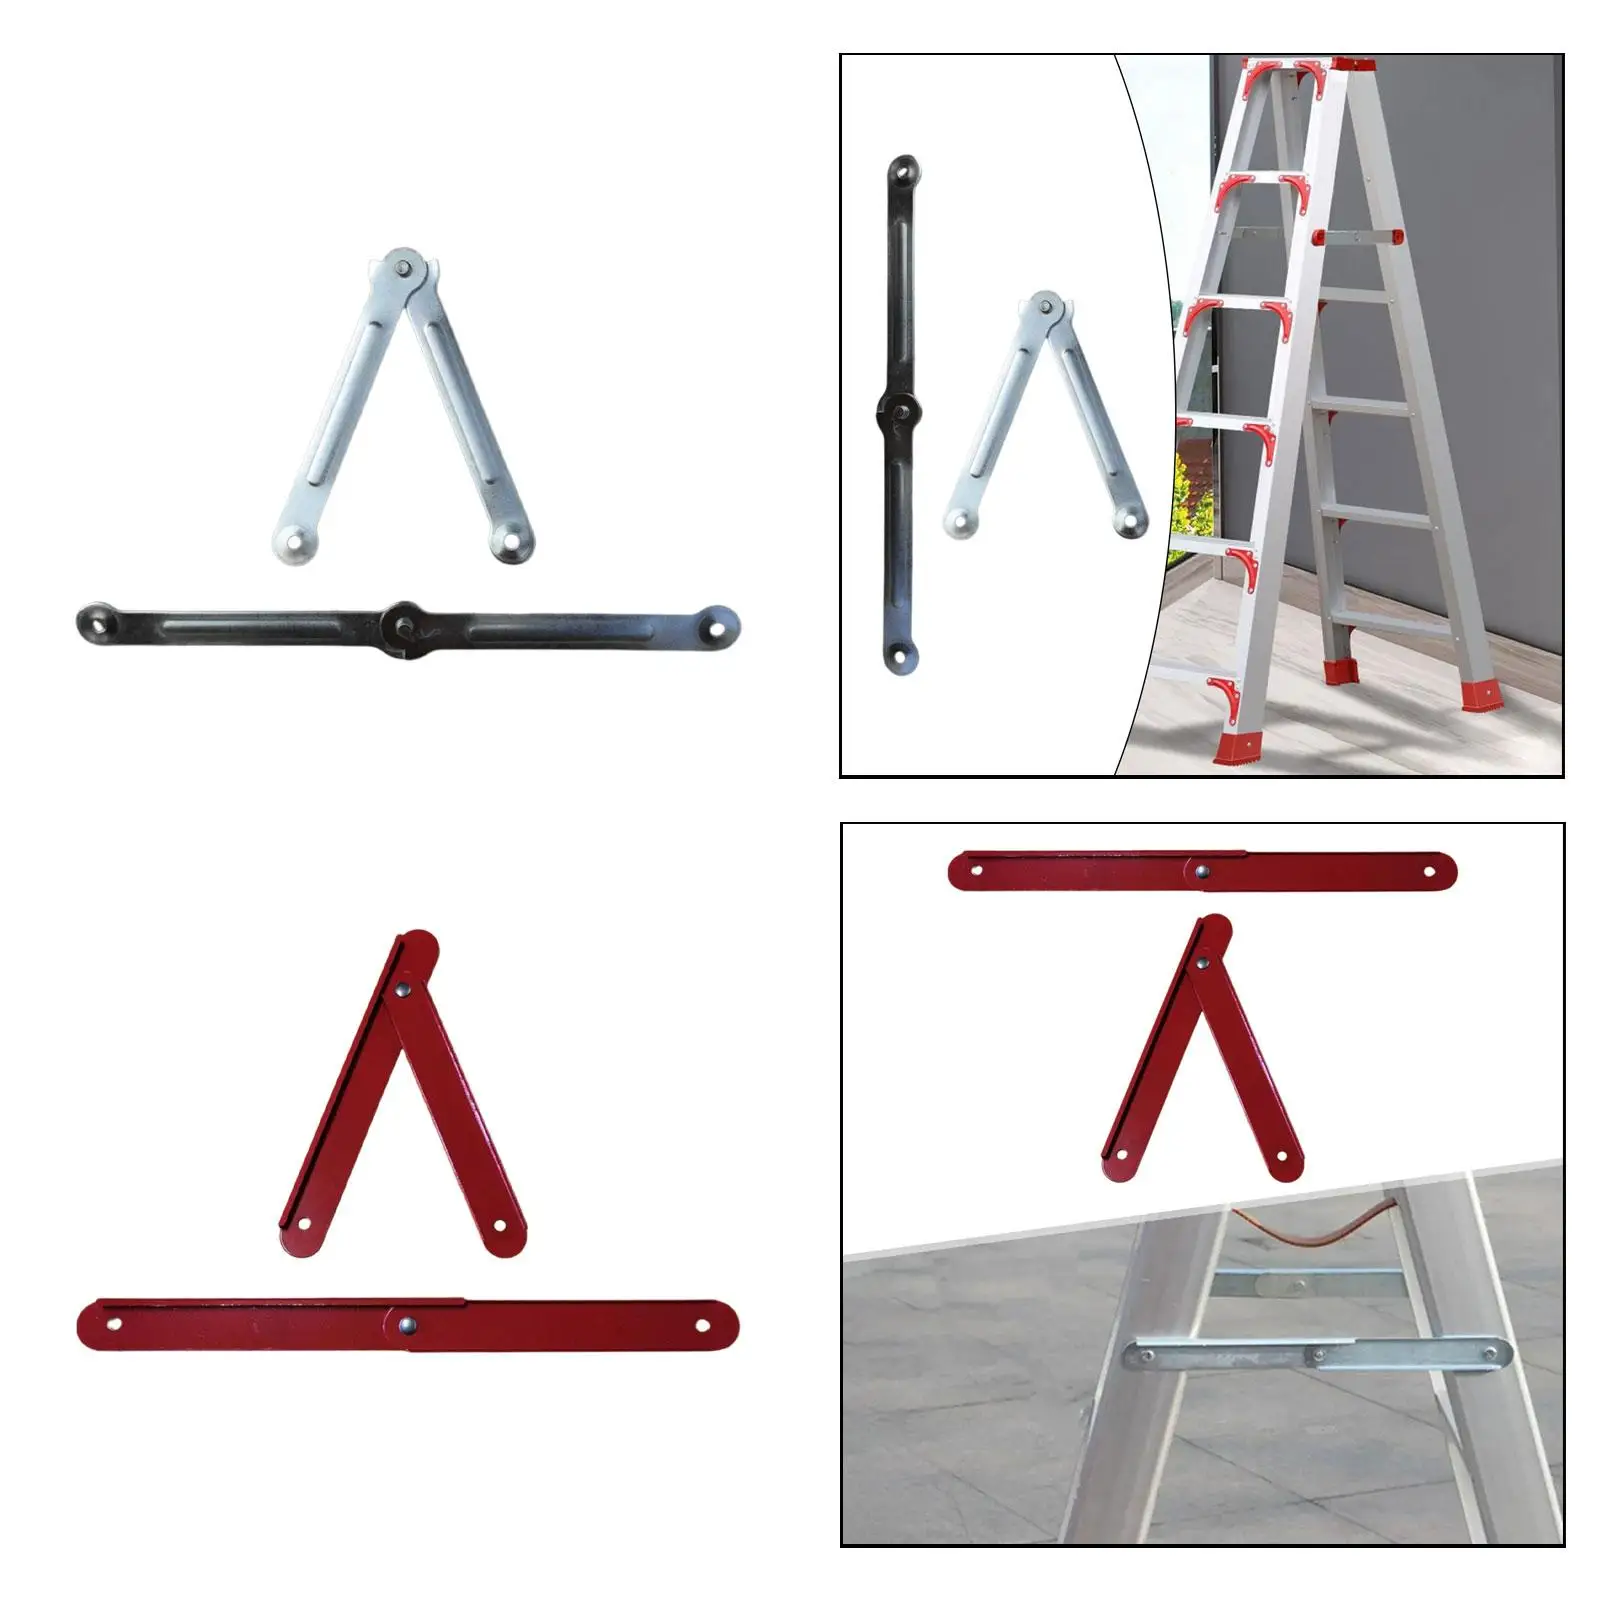 2 Pieces Ladder Accessories Fixed Support Replacement Kits Metal Bracket Herringbone Ladder Connector Replacement Ladder Rod